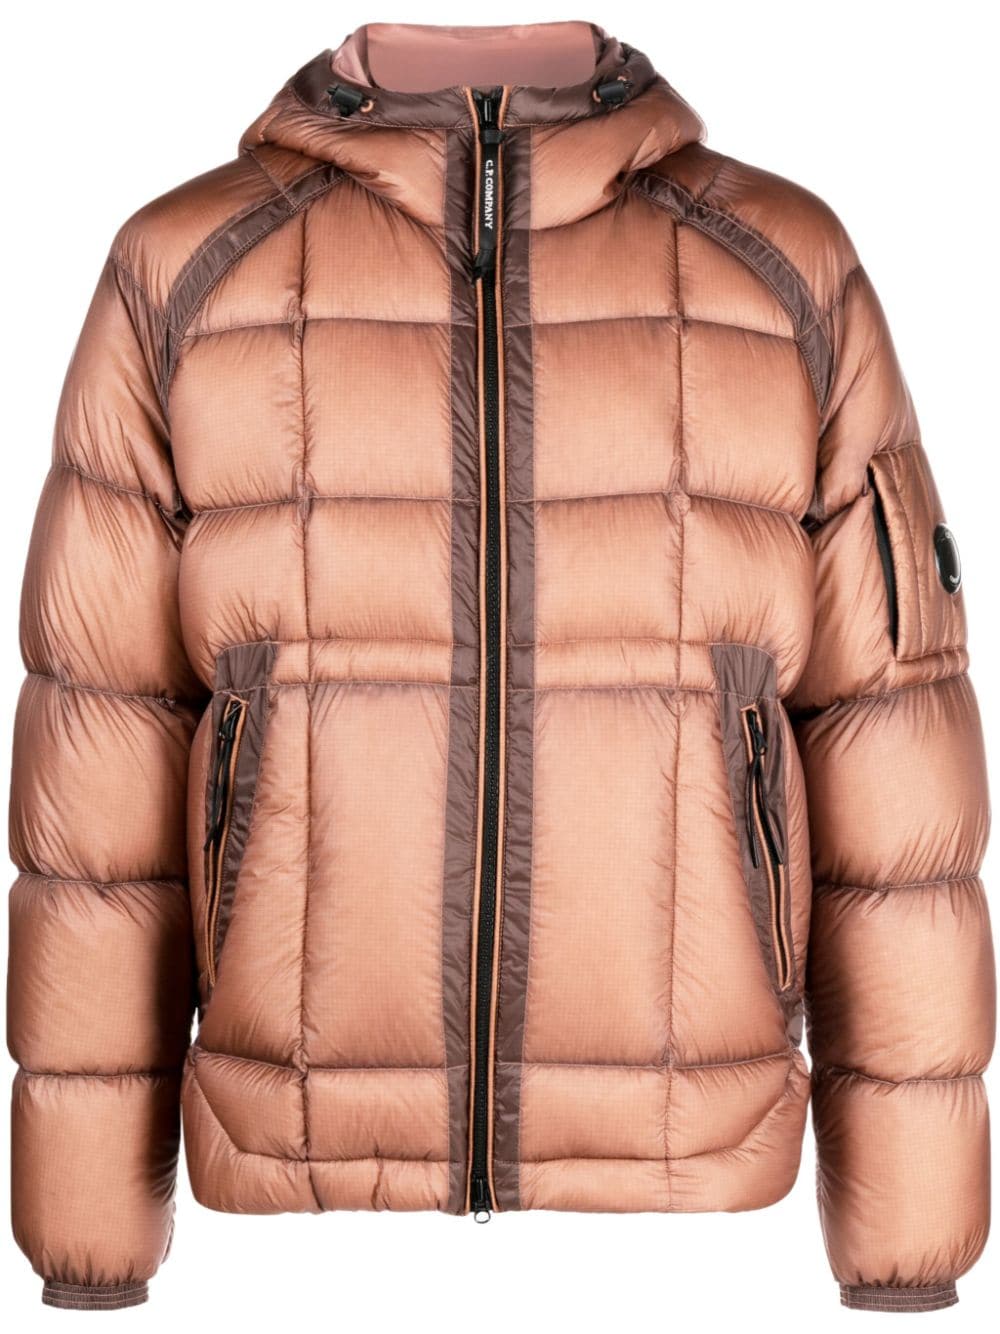 C.P. Company D.D. shell-hooded down jacket - Brown von C.P. Company